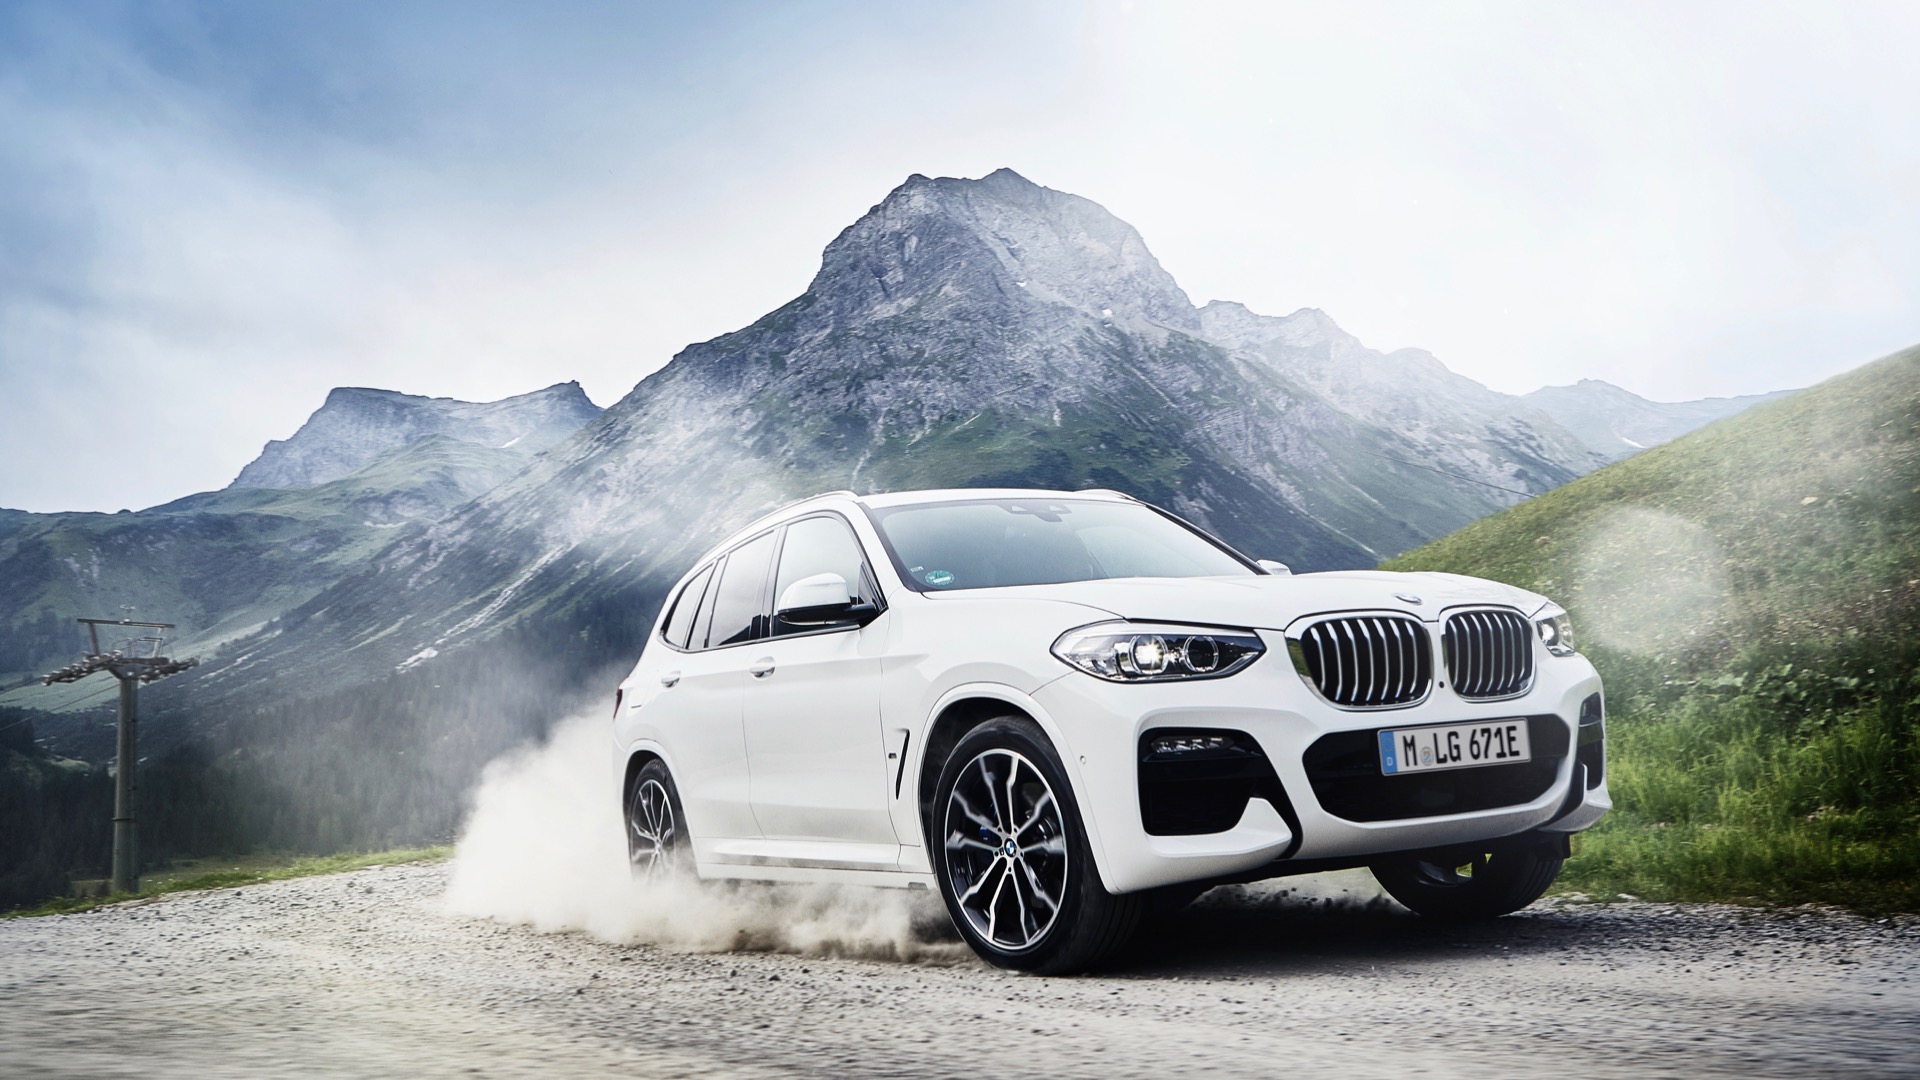 BMW X3 plug-in hybrid dropped, leaves no entry for brand in fast-growing EV  SUV segment